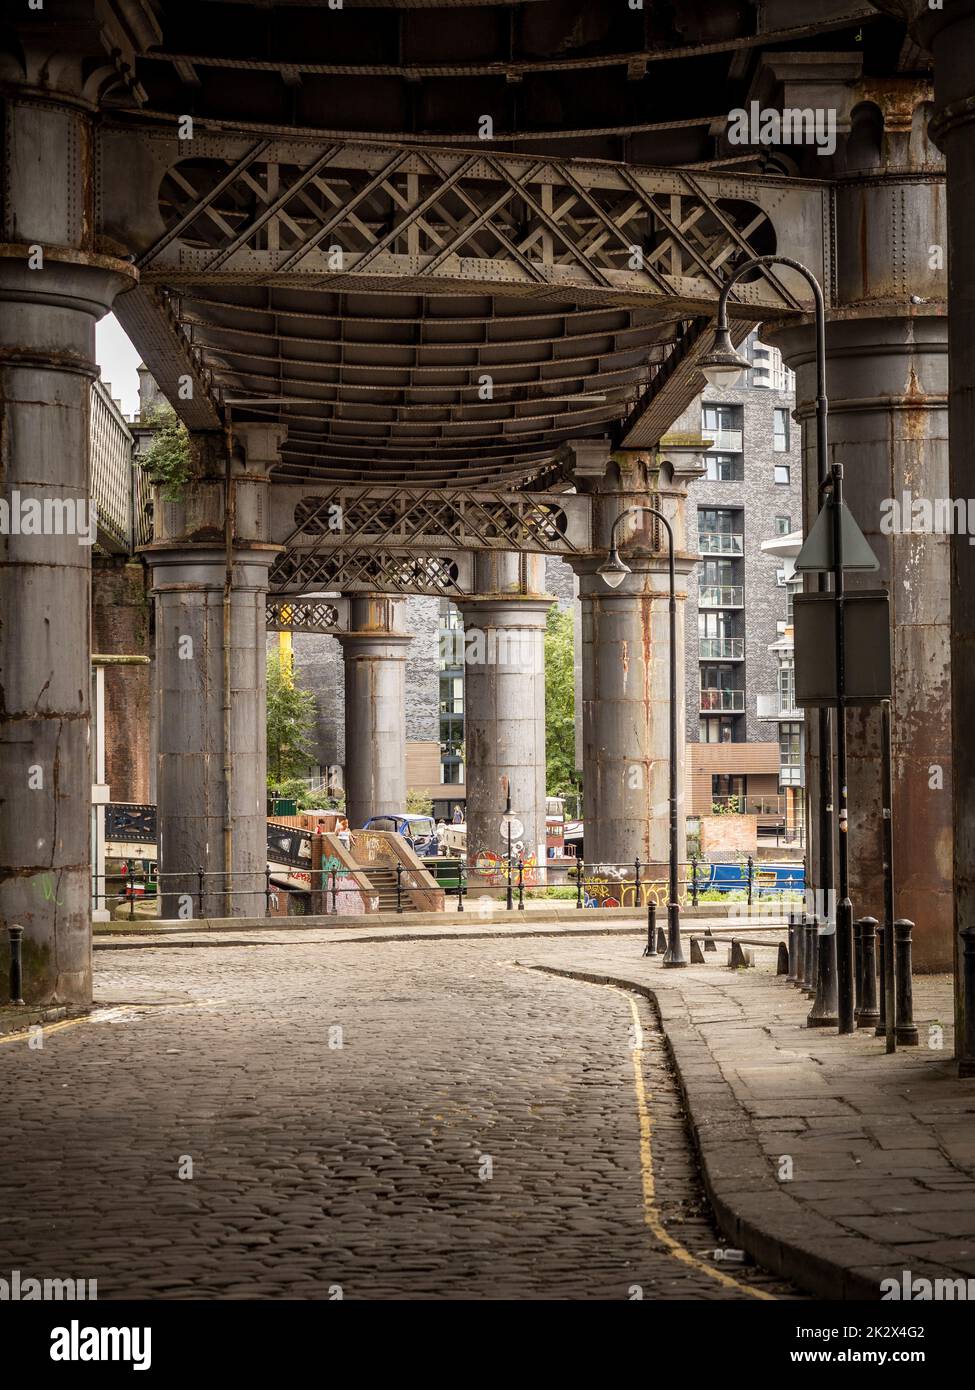 Duke Street with the steel supports of the railway bridge deck above, often used for the filming of period dramas. Castlefield. Manchester. UK Stock Photo